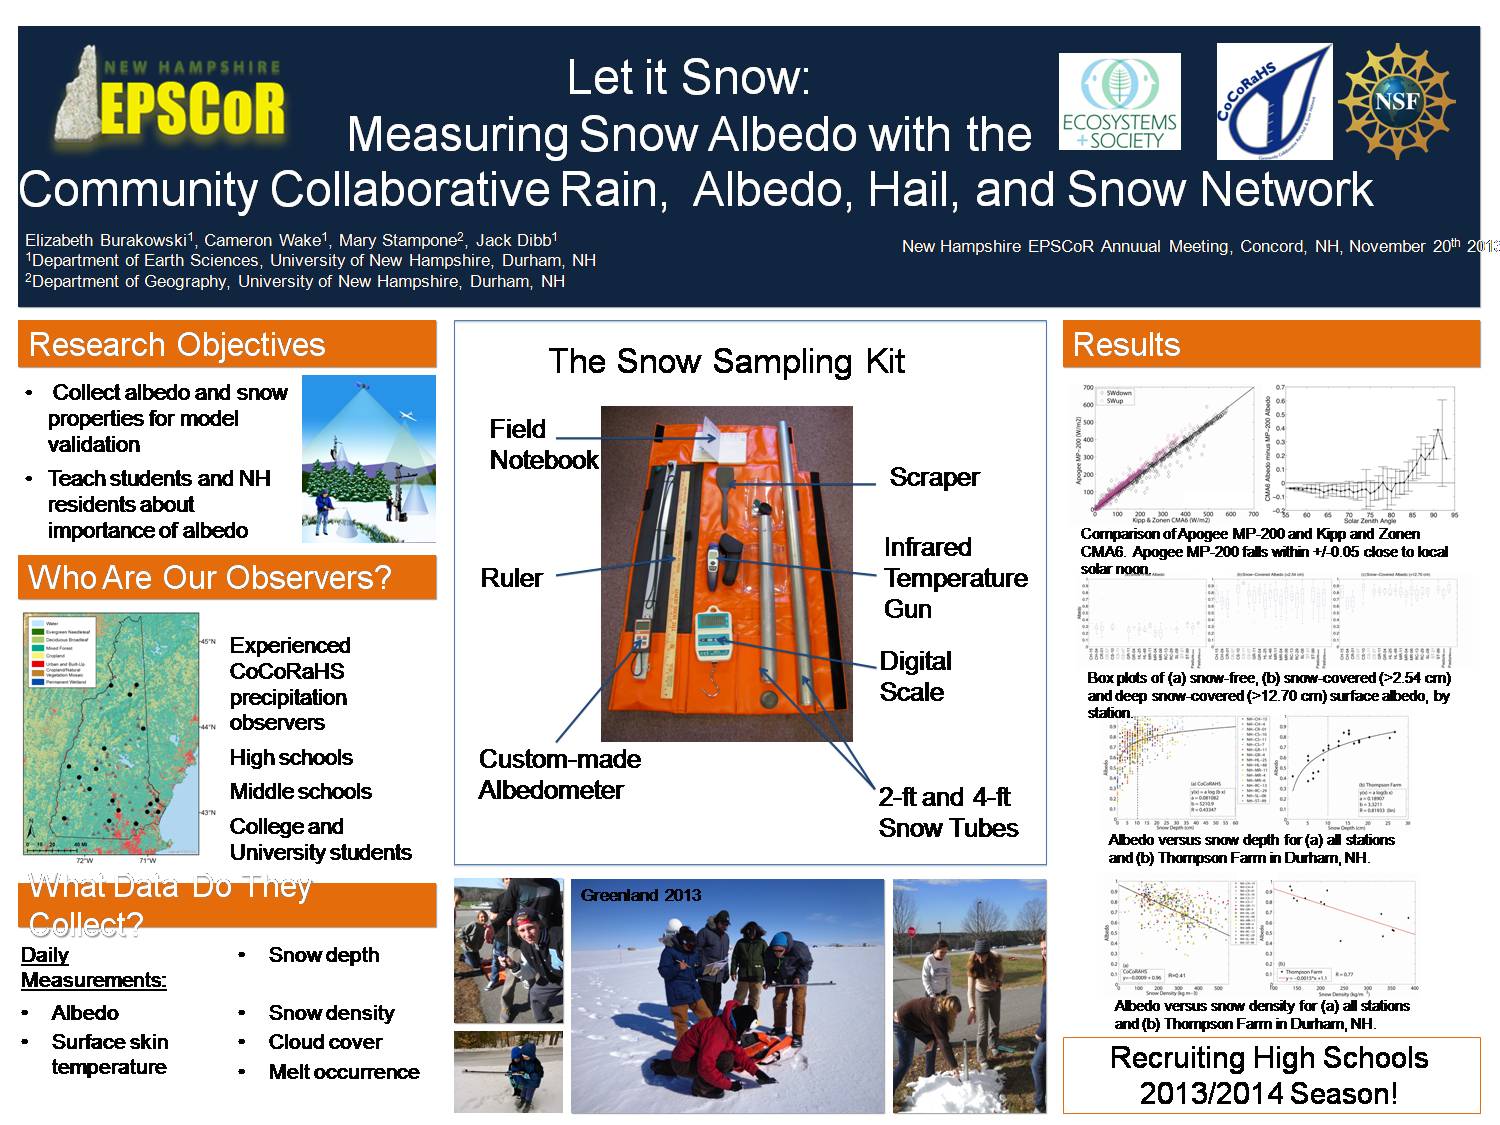 Let It Snow: Measuring Albedo With The Community, Collaborative, Rain, Albedo, Hail, And Snow Network by ean2